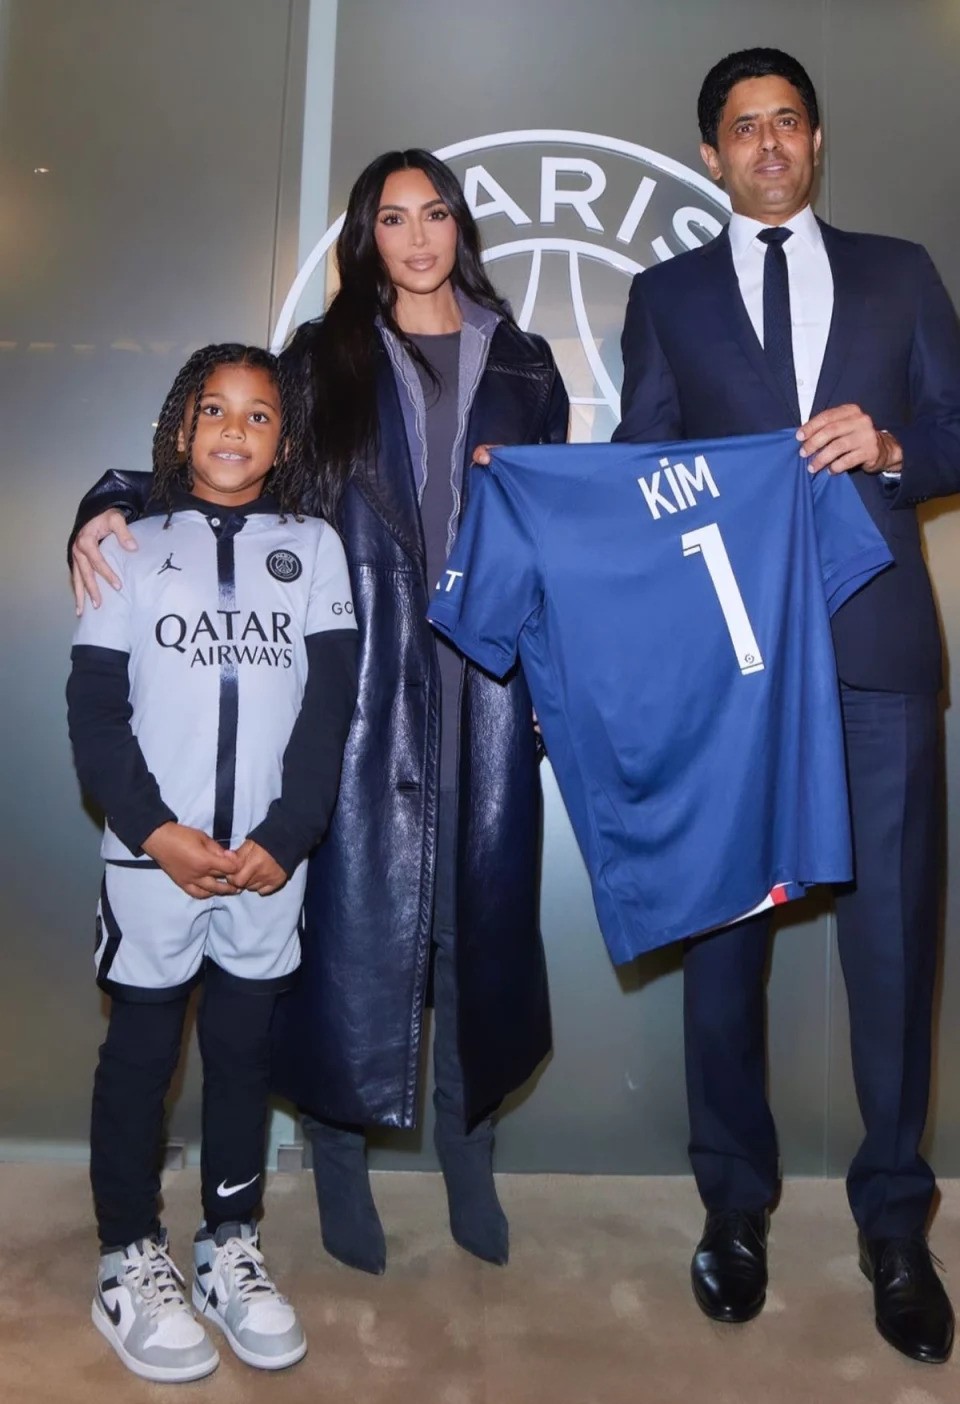 likhoa kim kardashian and her son saint met mbappe and kendall jenner while watching a soccer match in paris 6539e32593f36 Kim Kardashian And Her Son Saint Met Mbappe And Kendall Jenner While Watching A Soccer Match In Paris